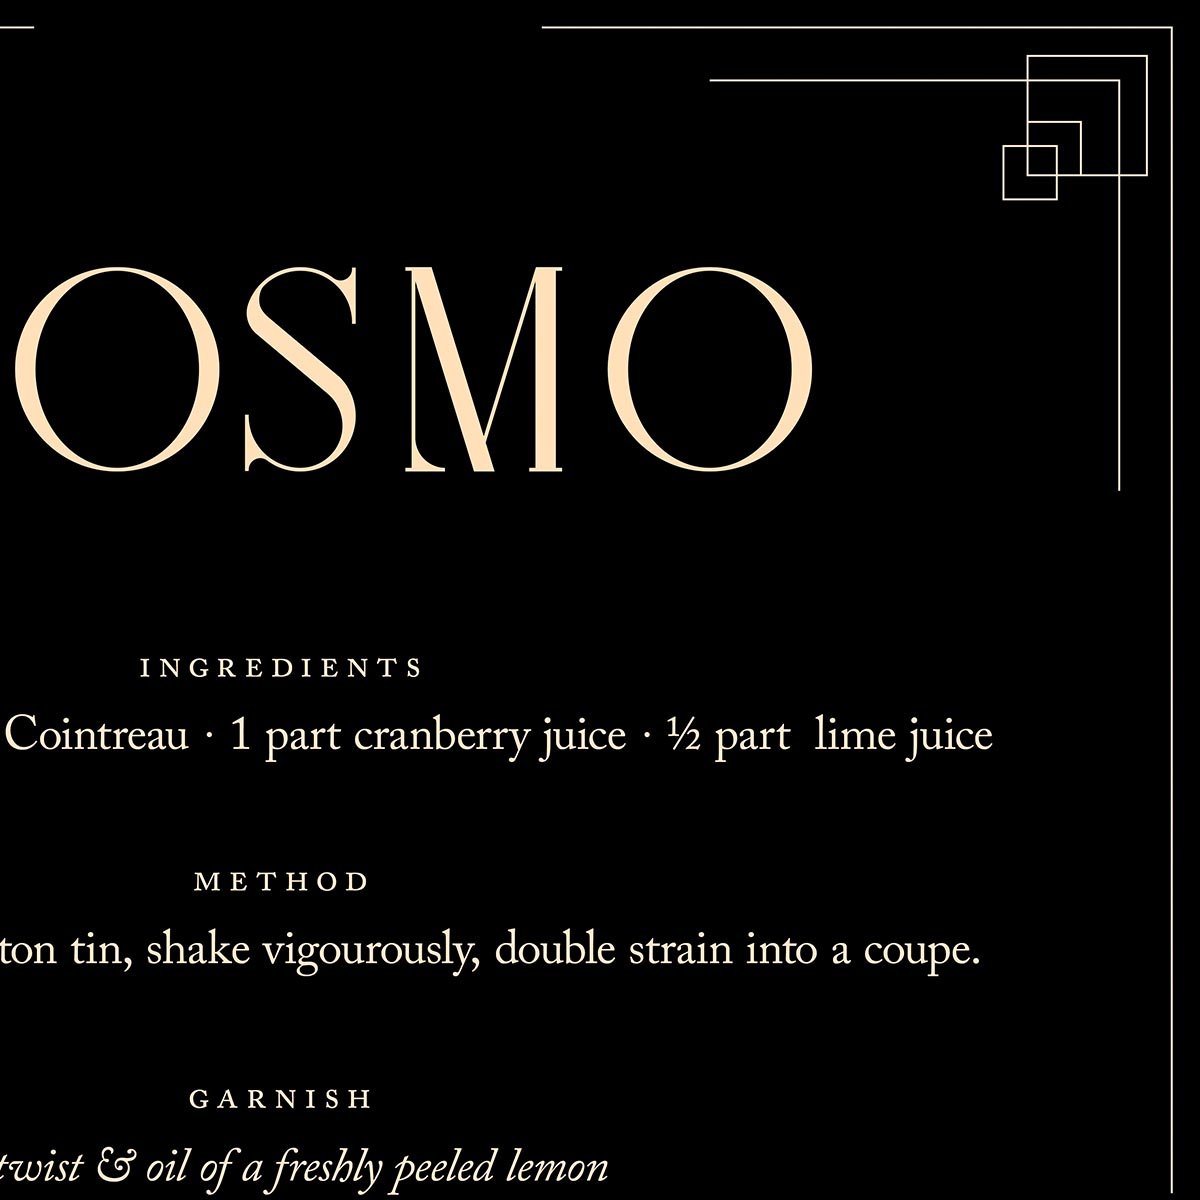 Cosmo Cocktail Recipe Poster